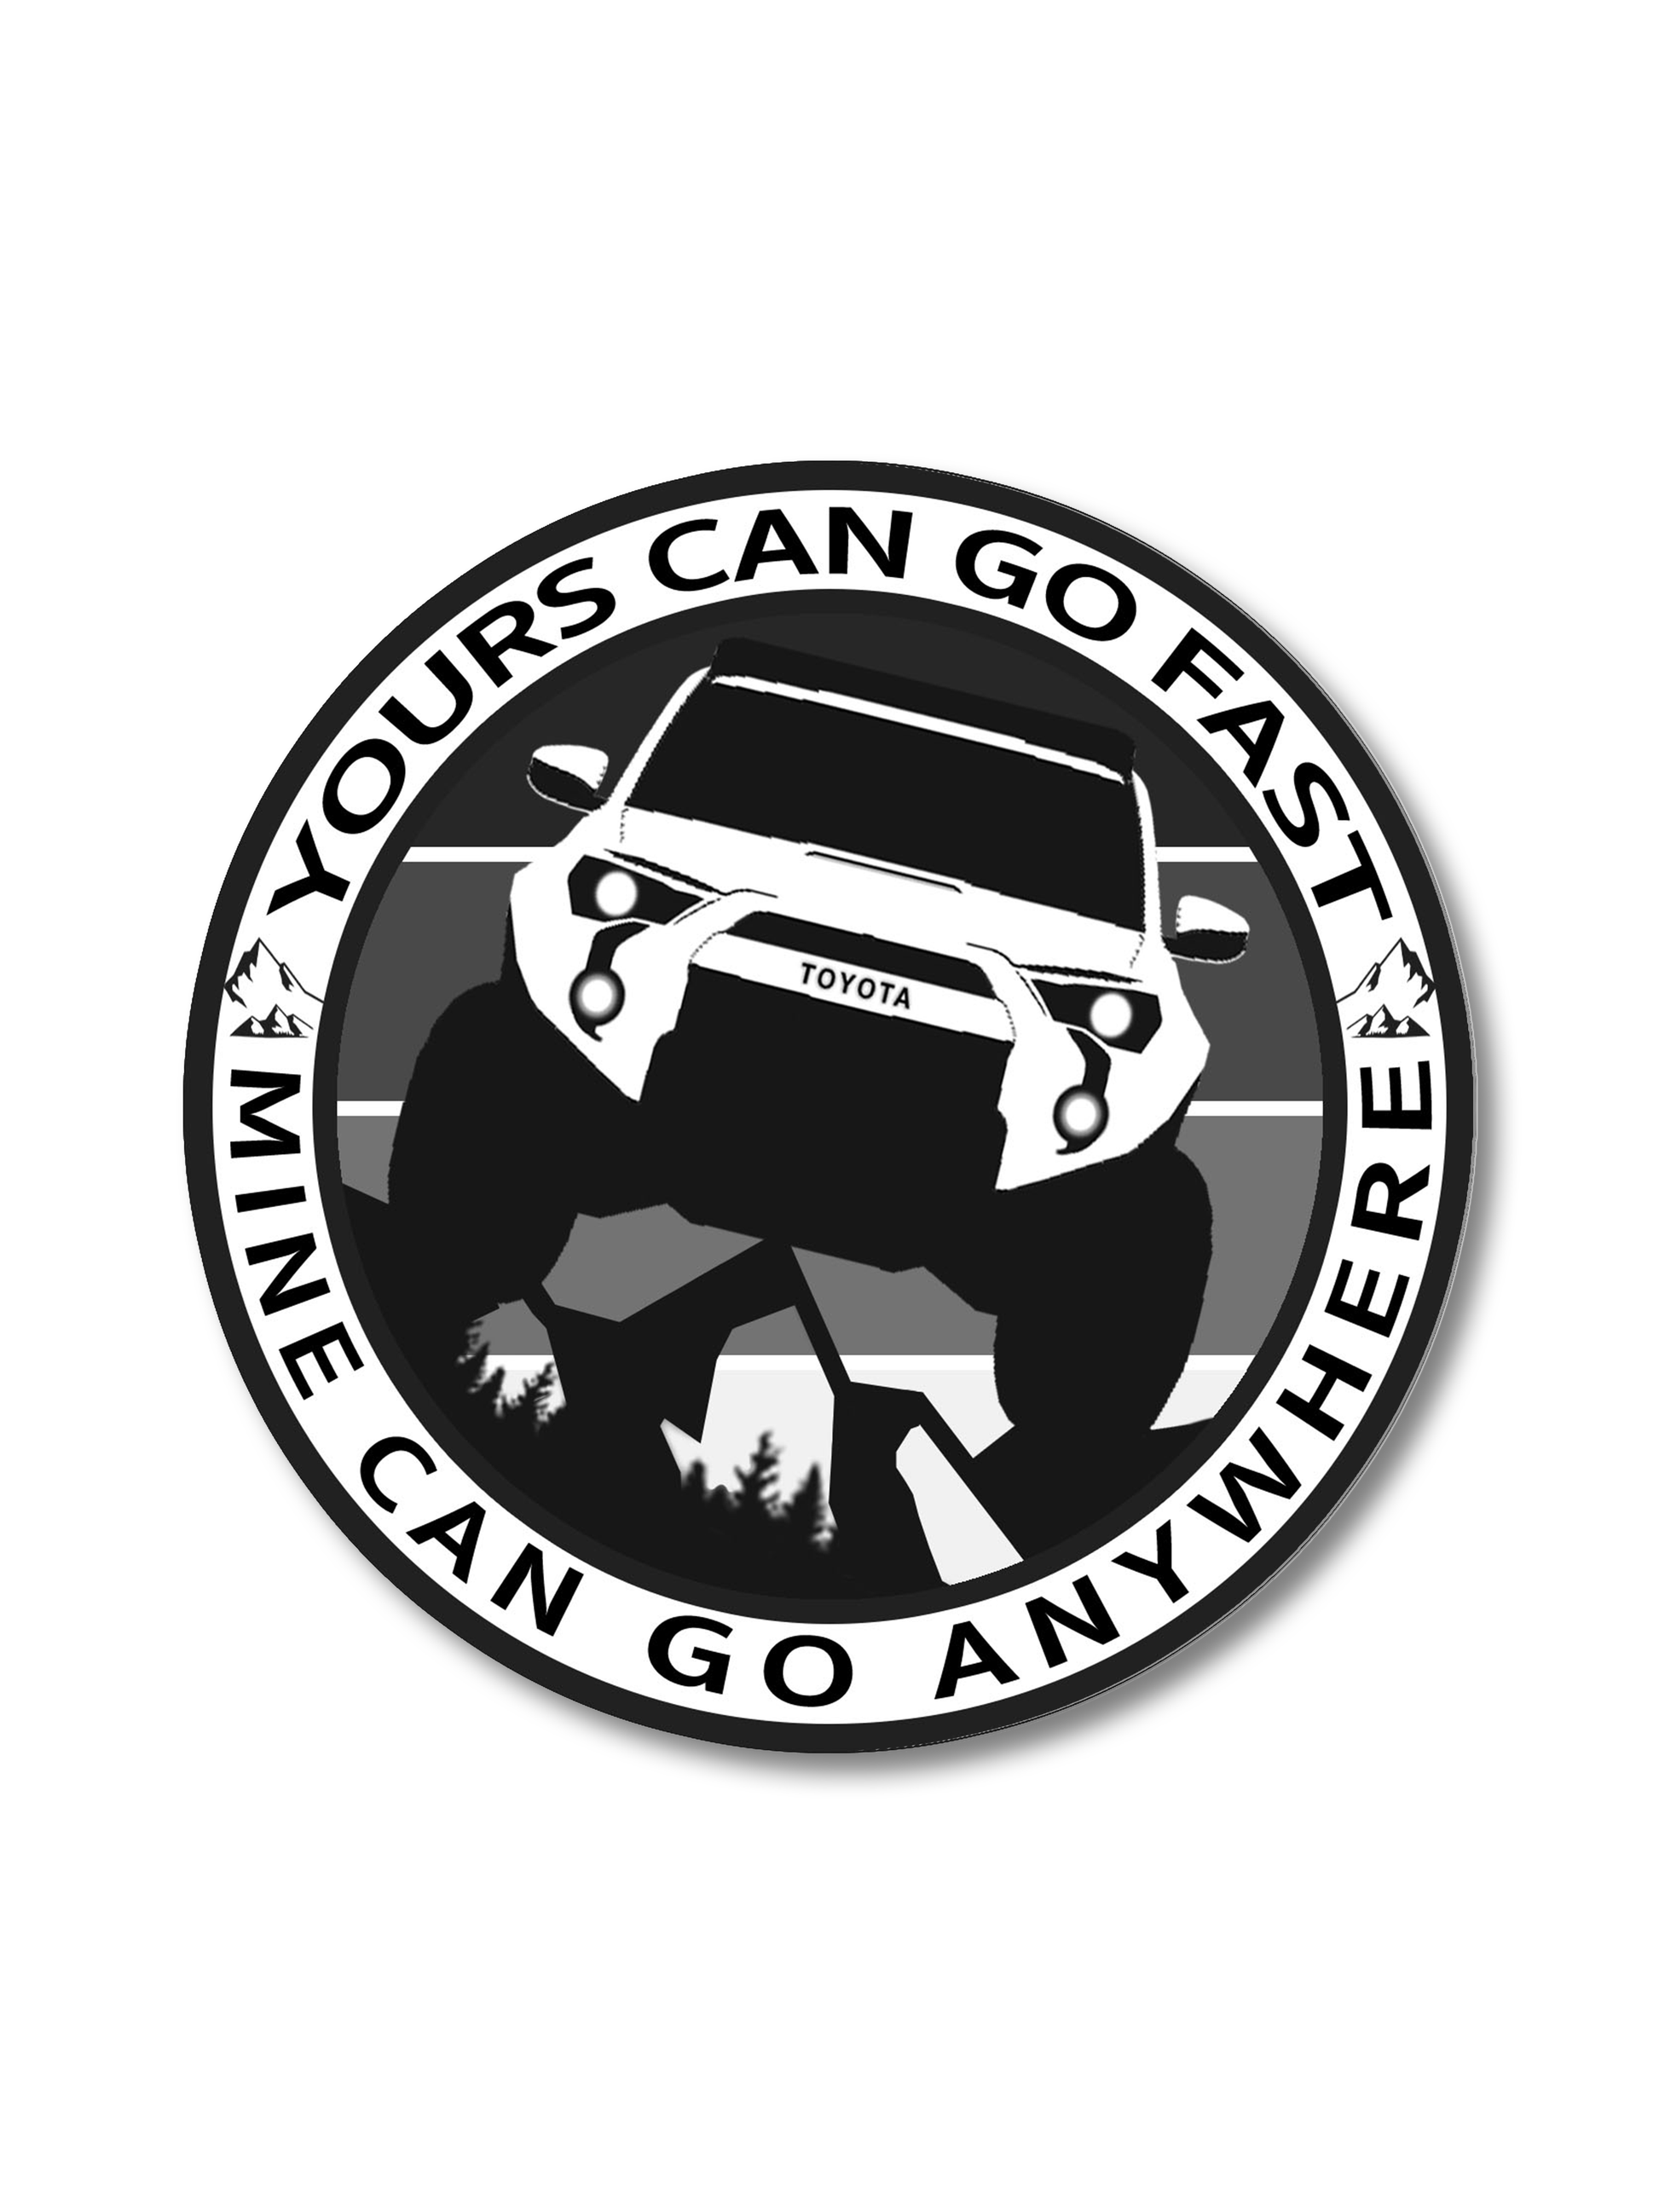 yours can go fast mine can go anywhere vinyl weatherproof sticker, 4Runner Gear